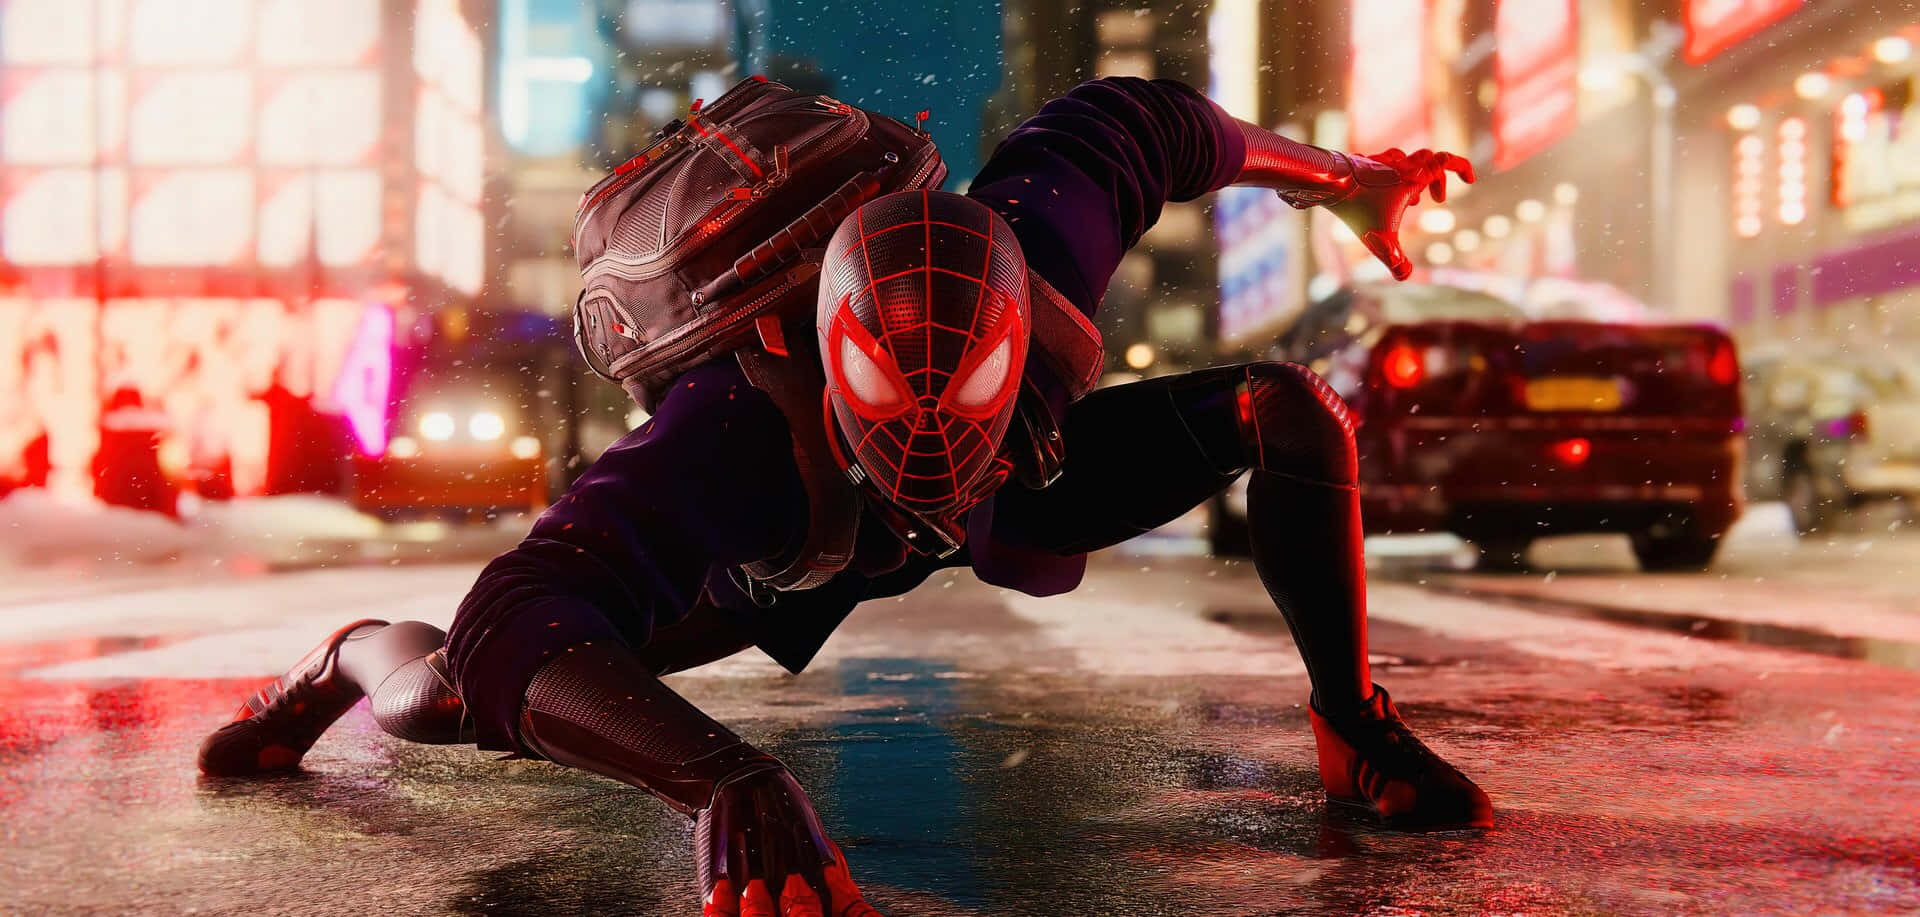 https://wallpapers.com/images/featured/miles-morales-pictures-ed0srulobig323r2.jpg